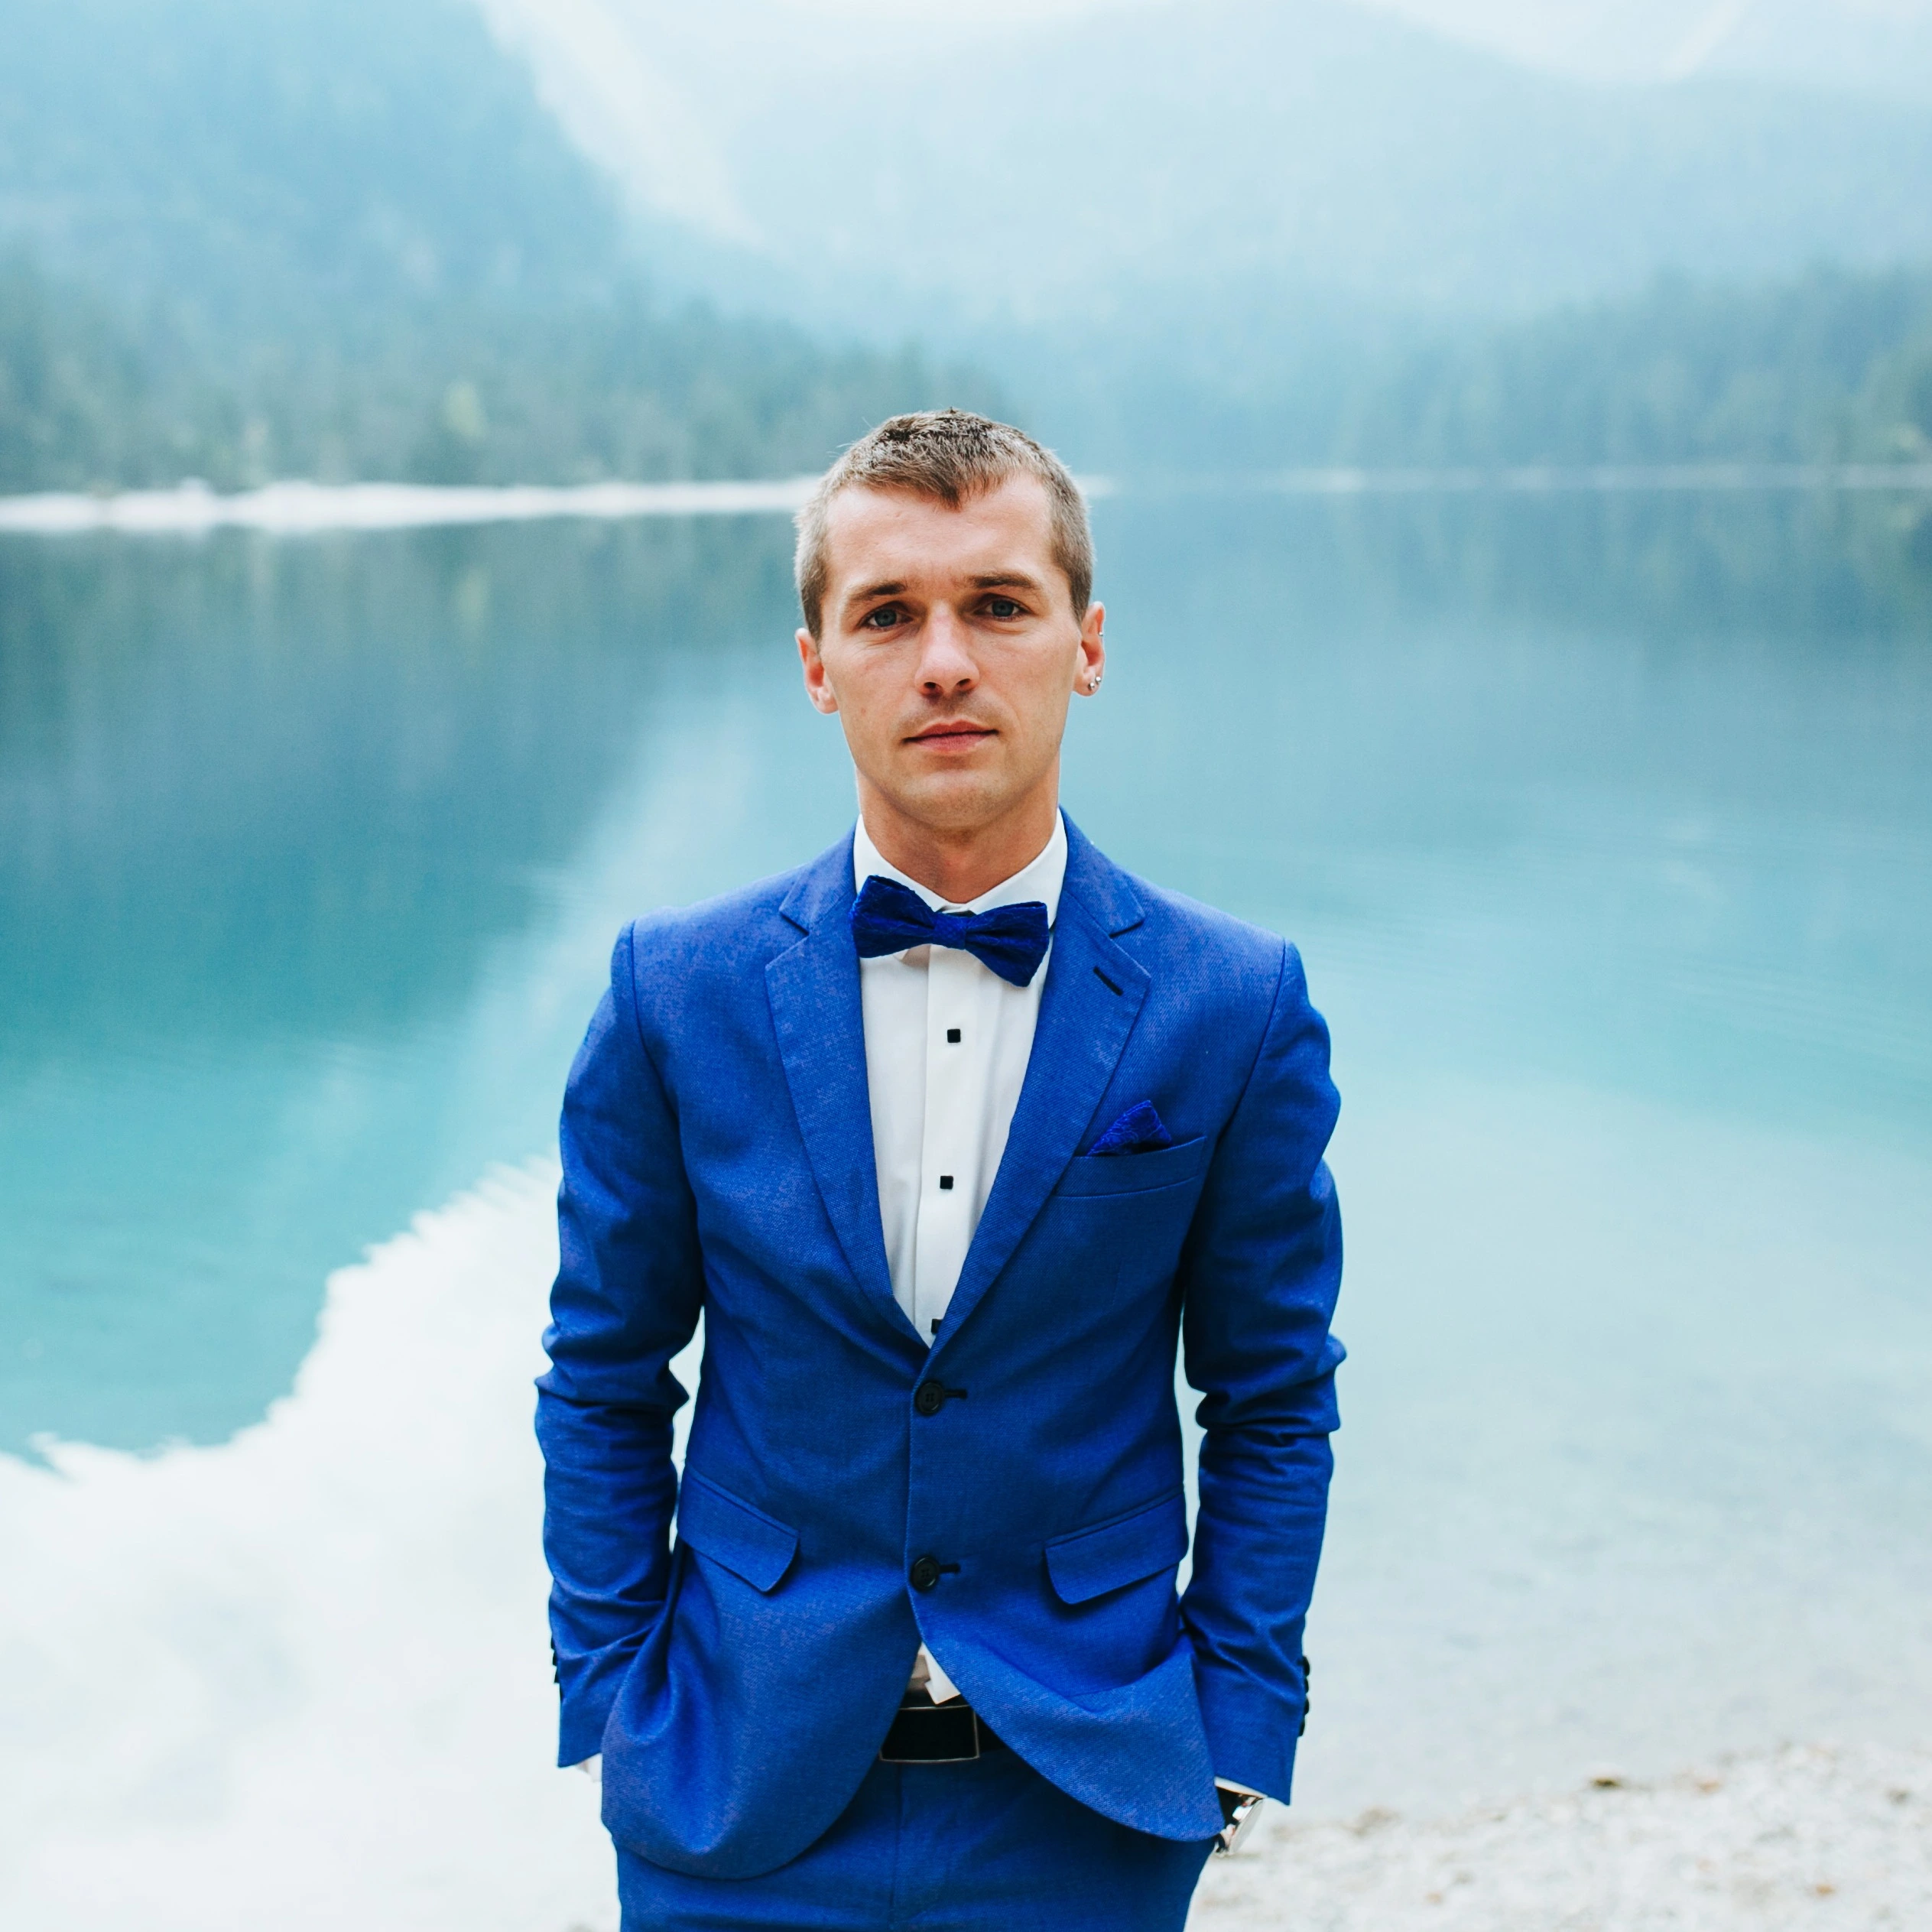 A man with royal blue wedding suit 1